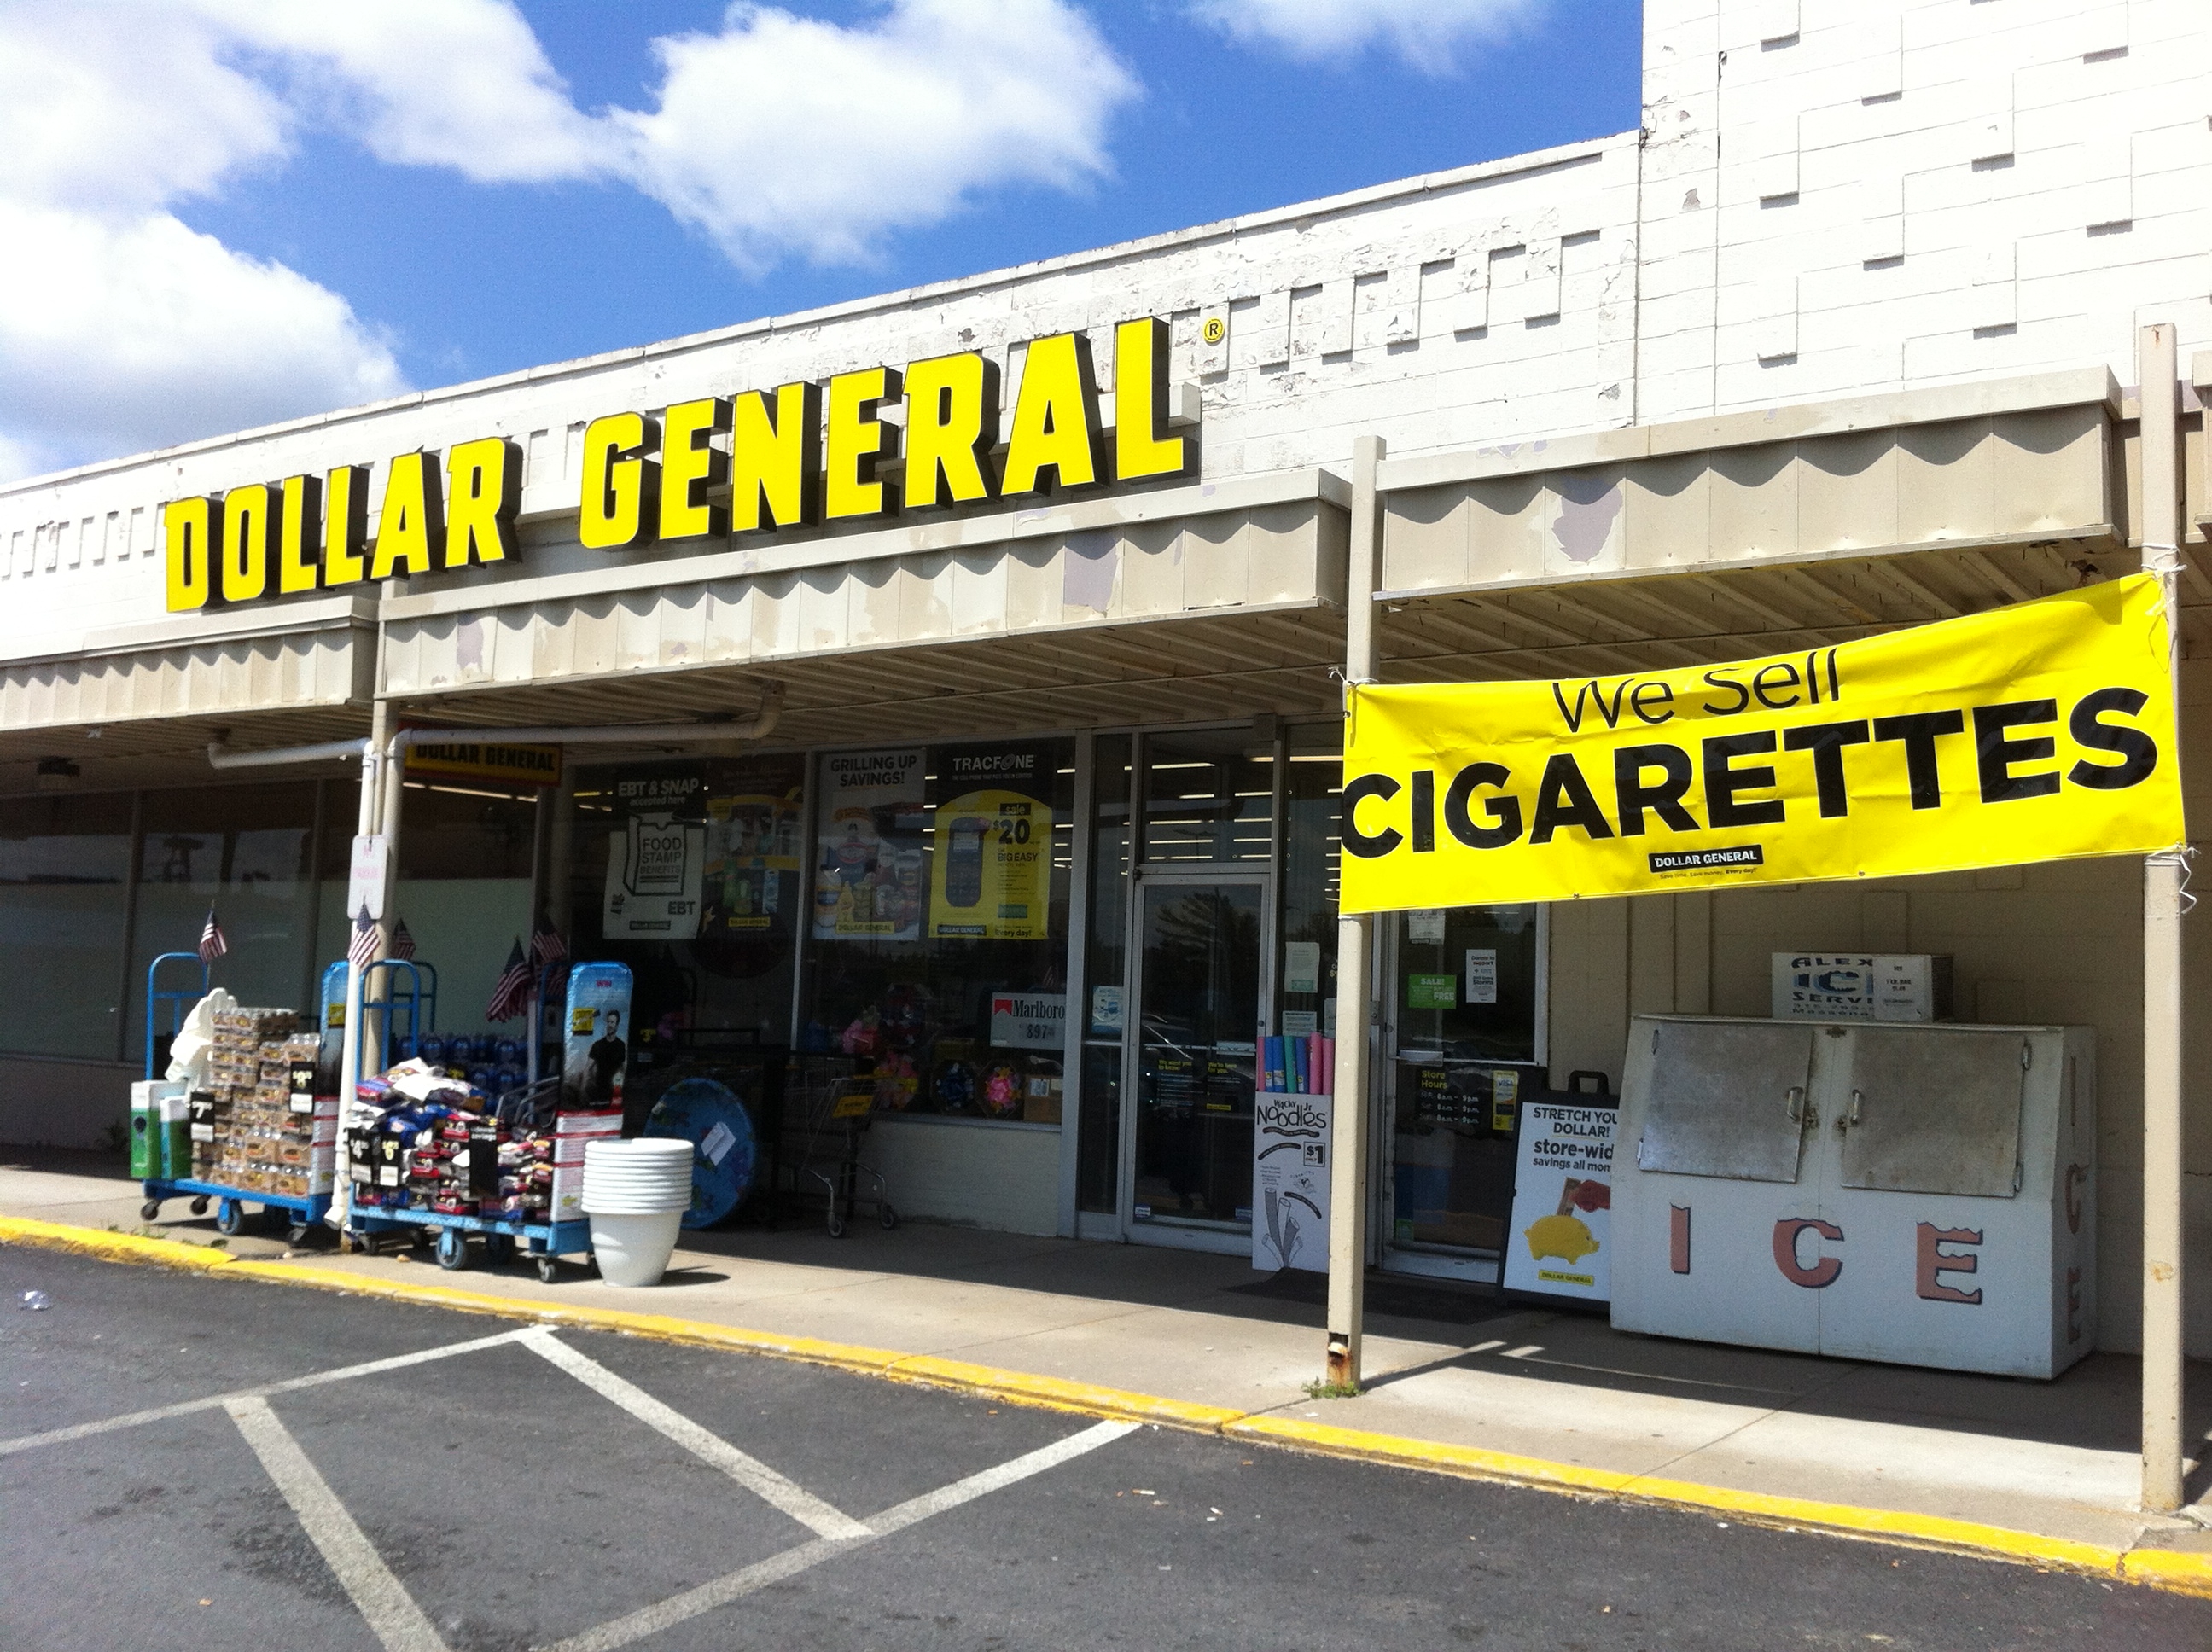 Dollar General with 